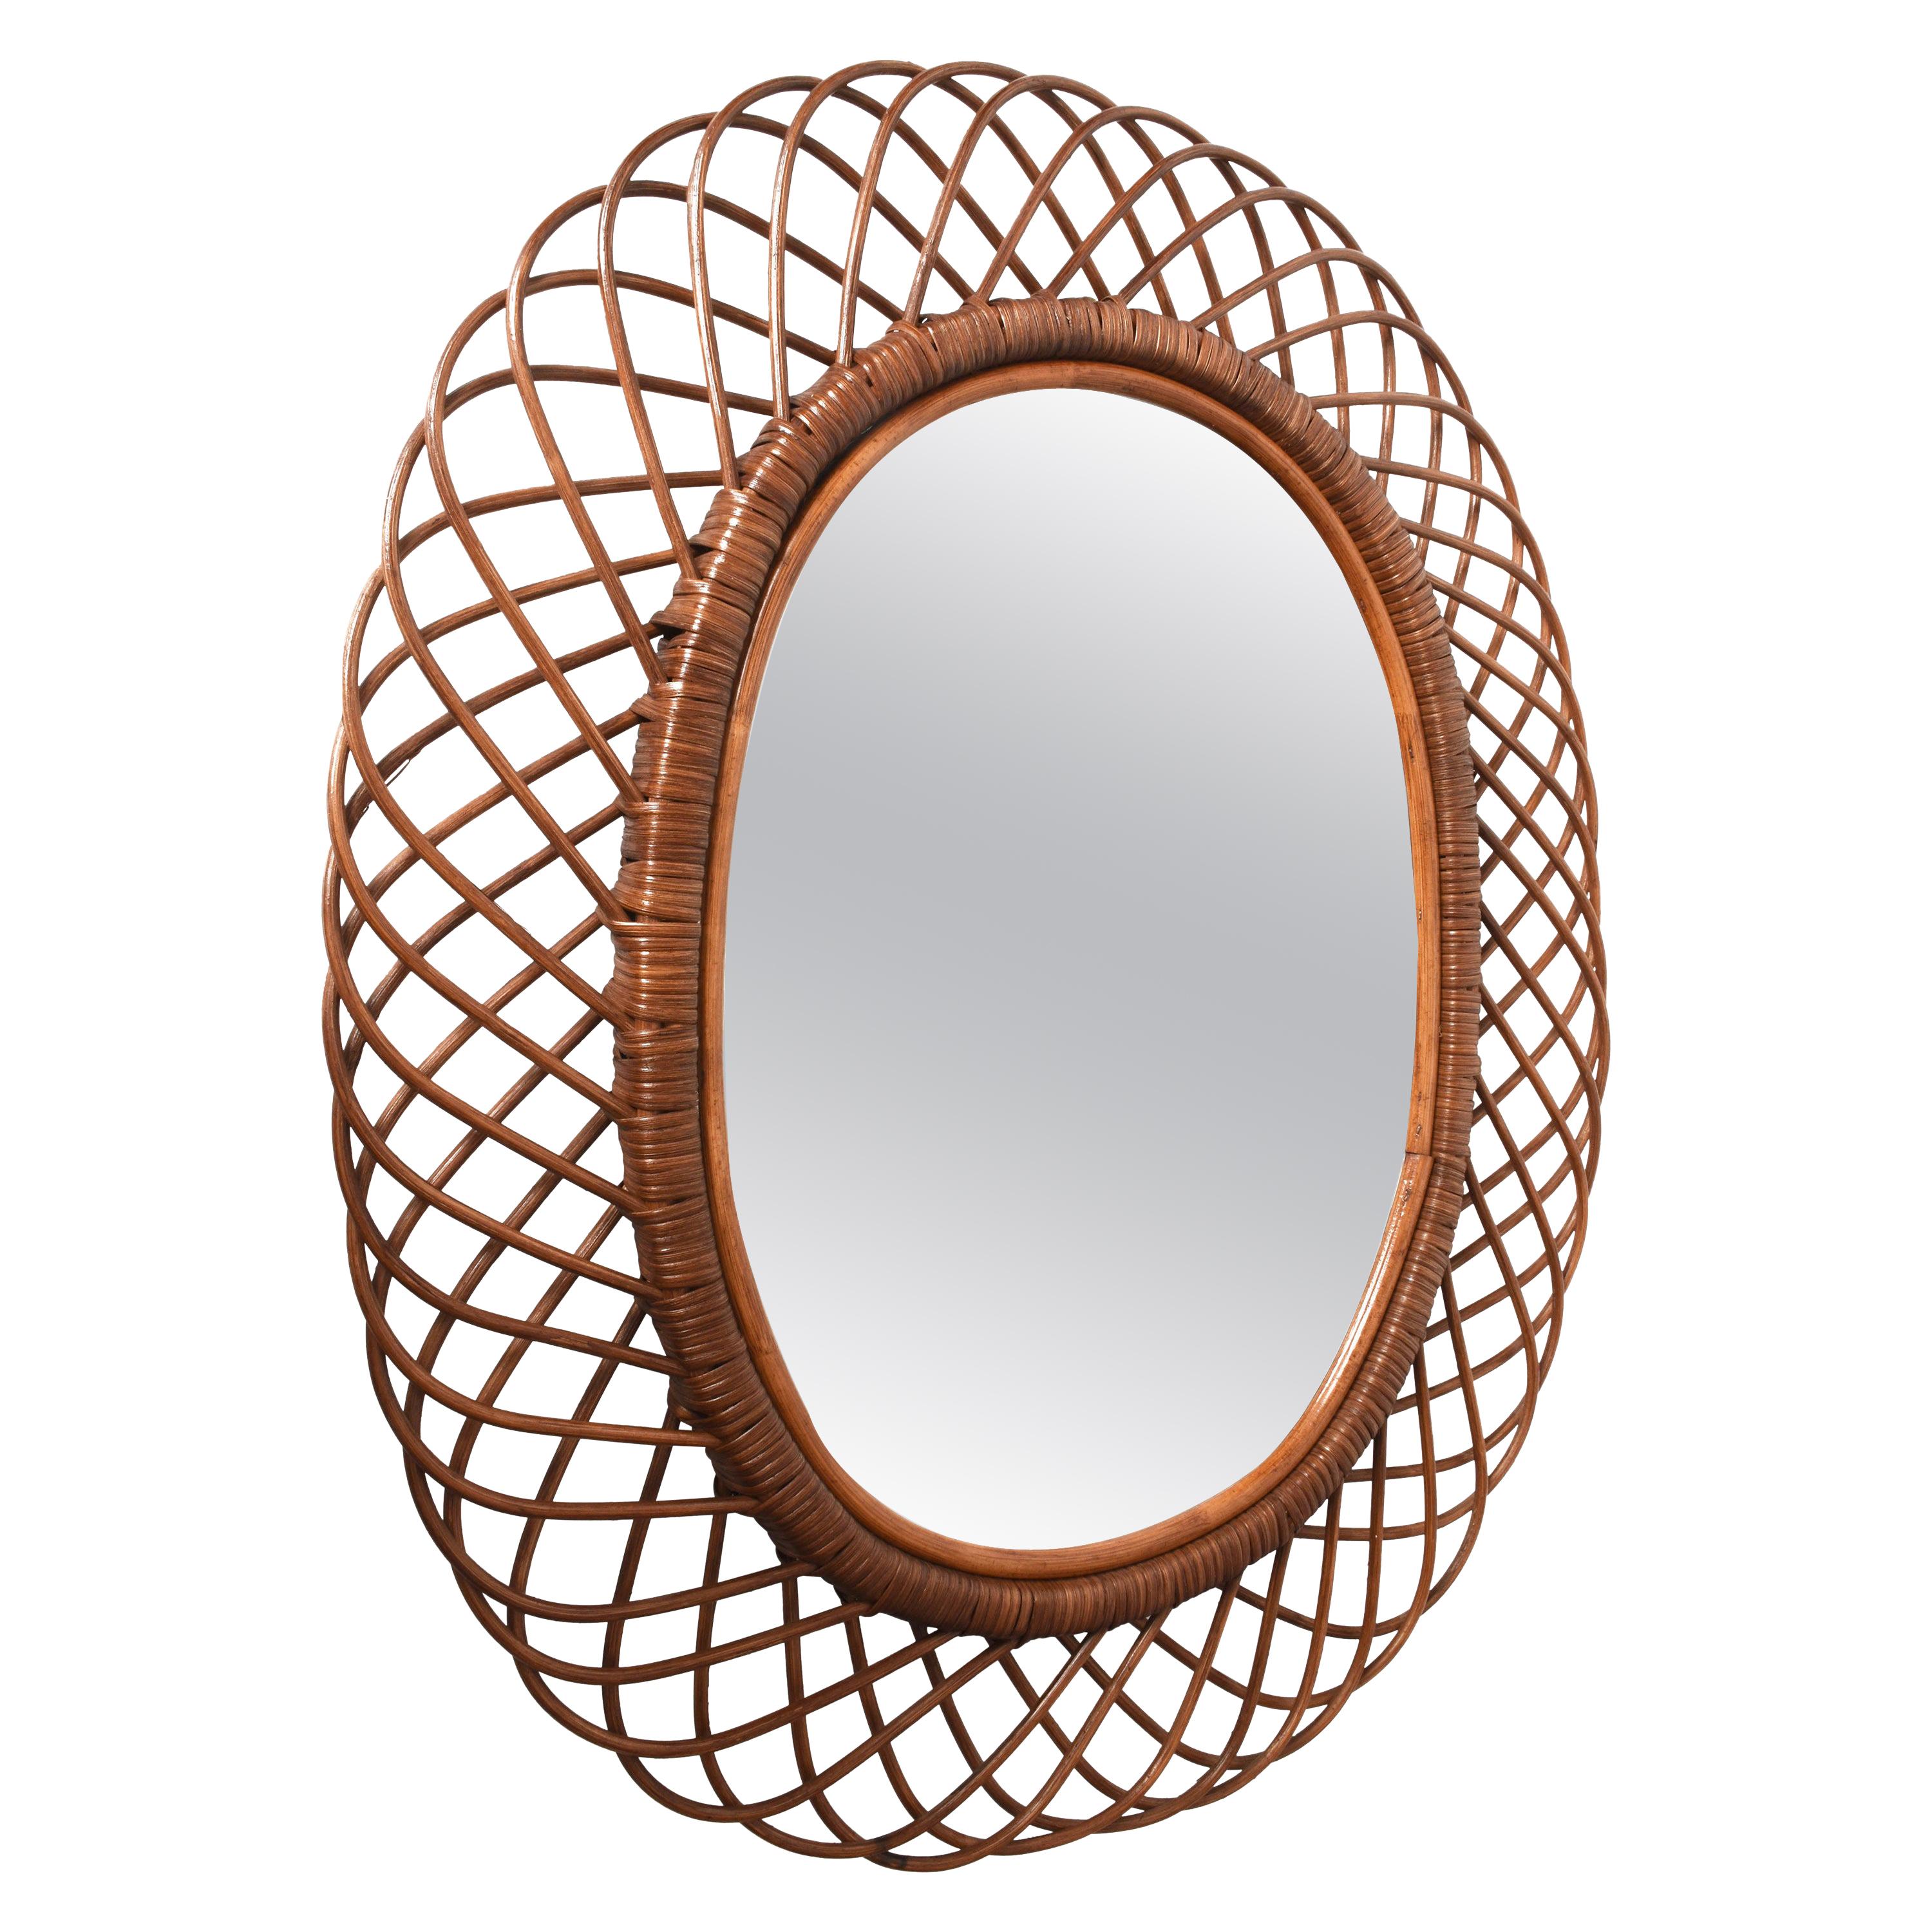 Amazing midcentury French Riviera rattan and bamboo oval mirror. This marvellous item was produced in Italy during 1960s.

This decorative oval mirror is unique as it has a curved rattan beam and bamboo double frame, a solid internal one and an